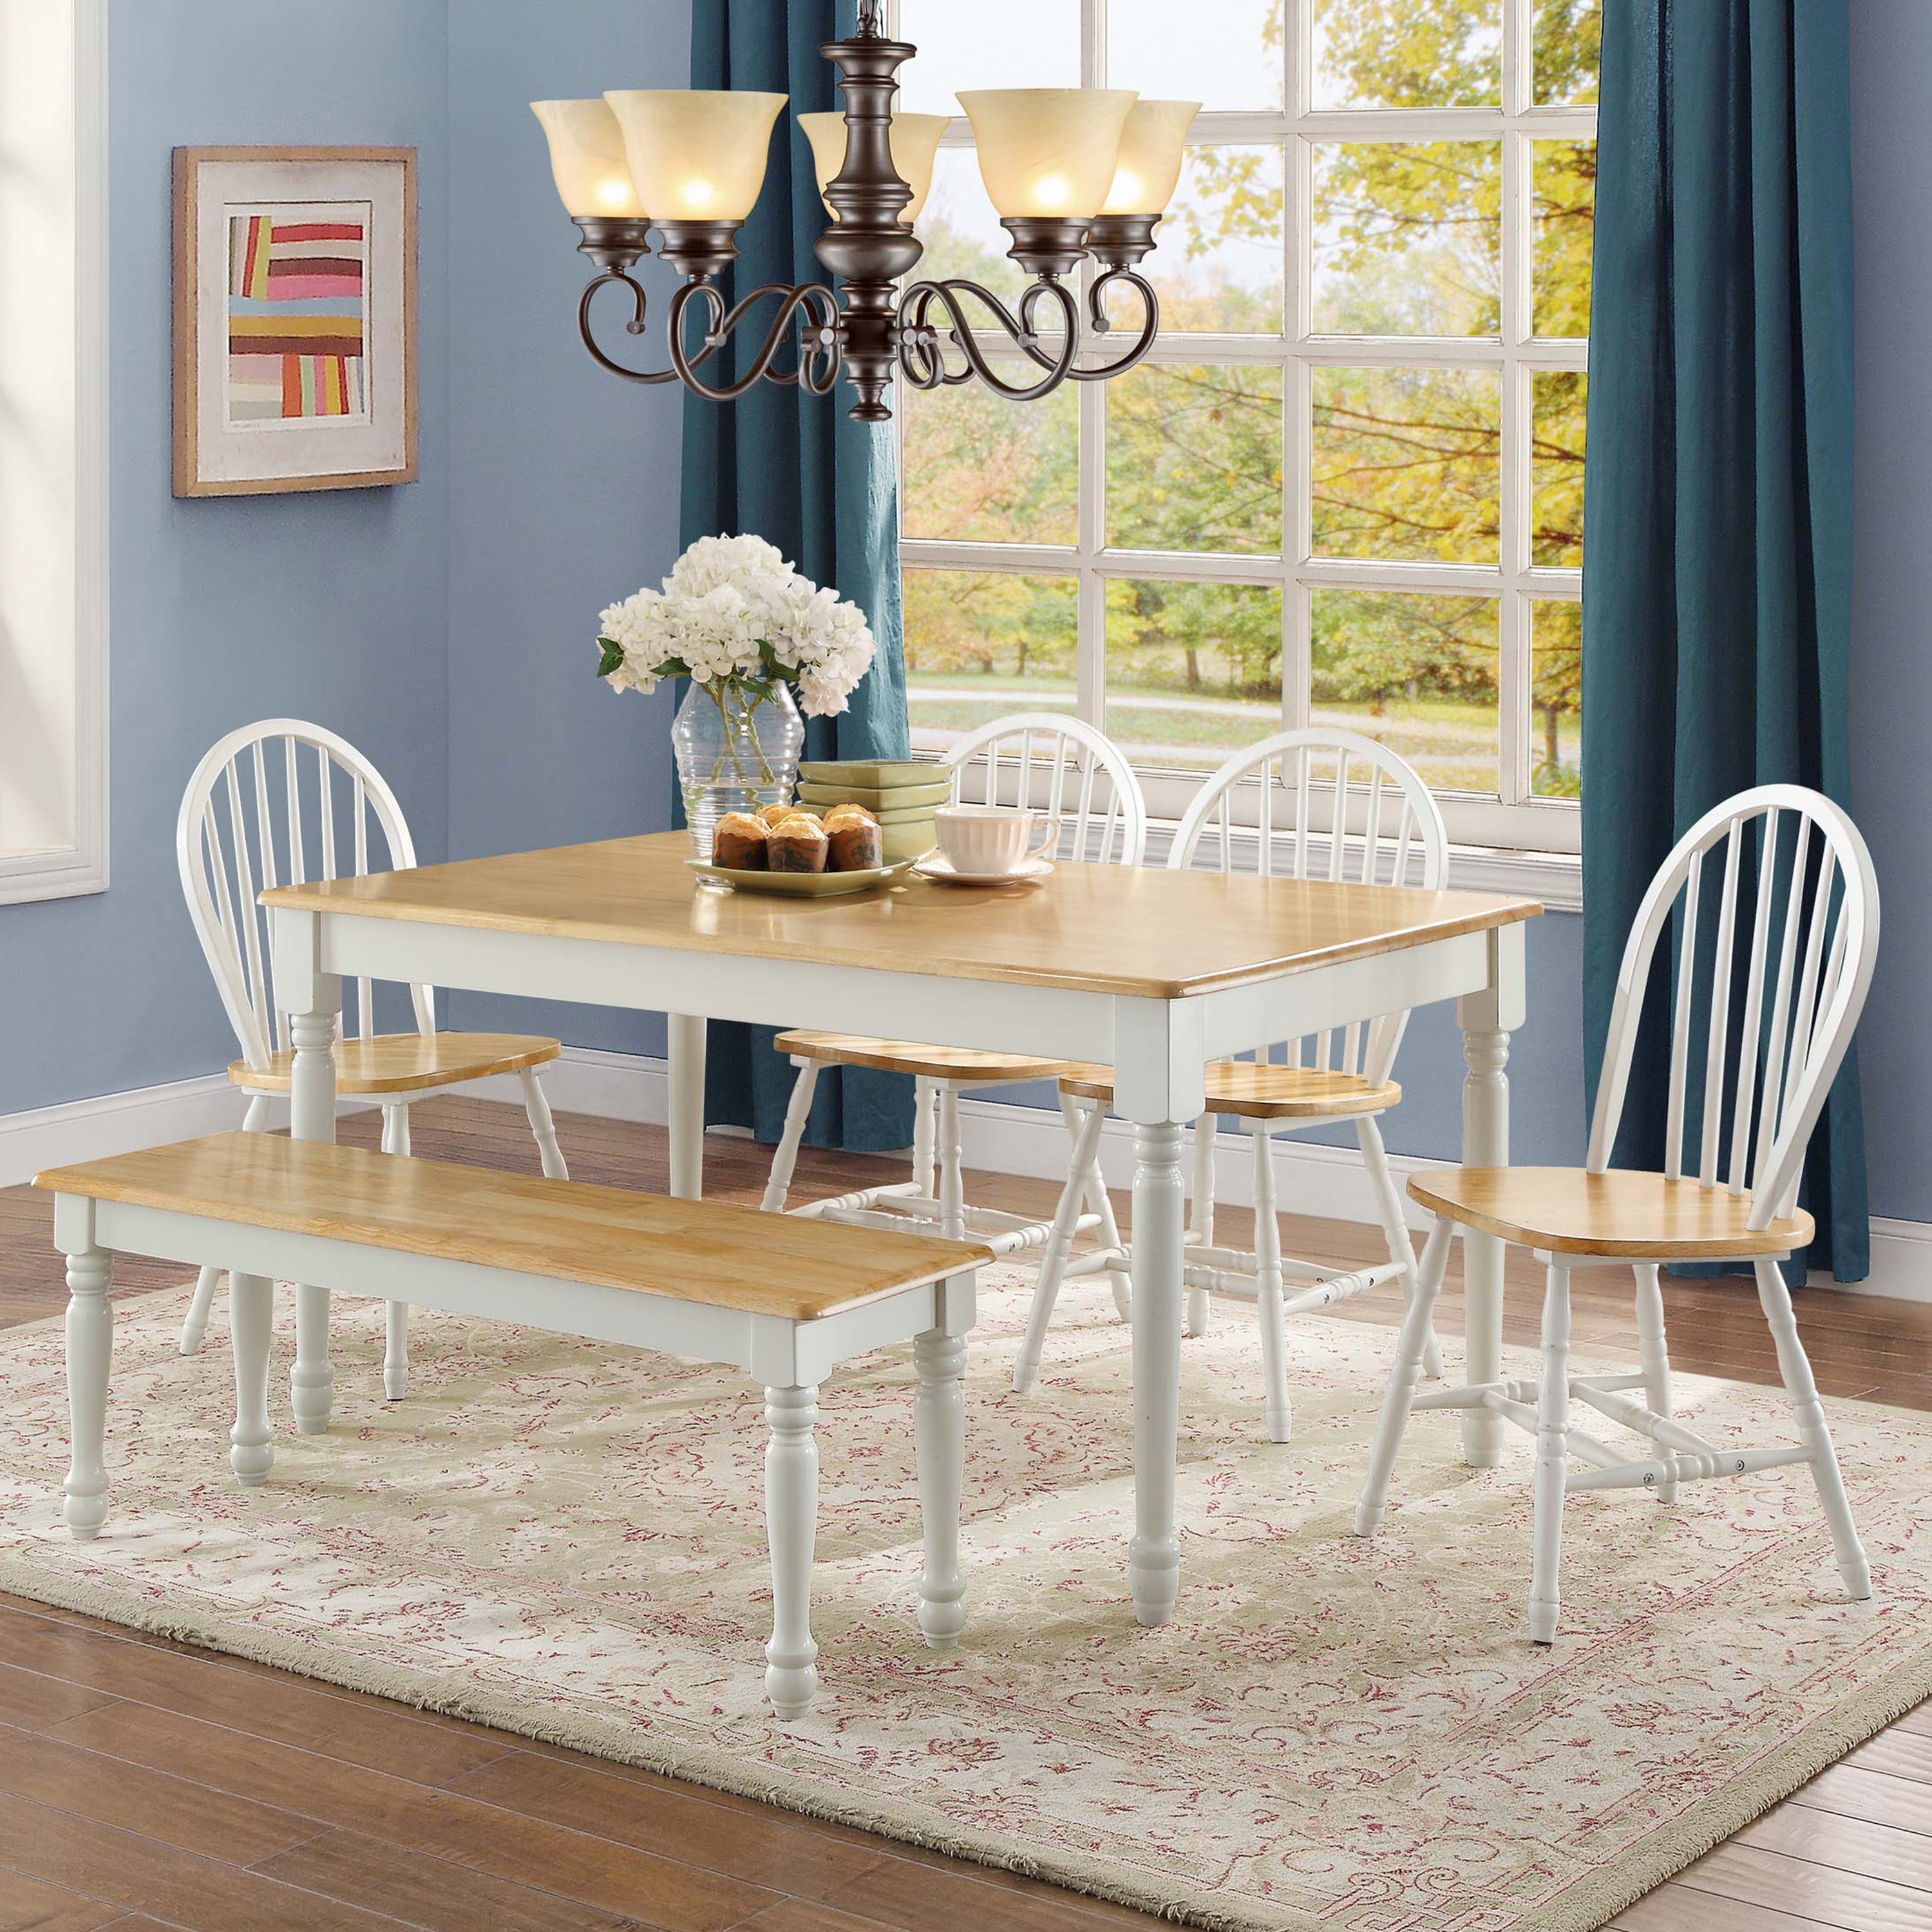 White and Natural Windsor Chairs Dining Room Kitchen Home ...